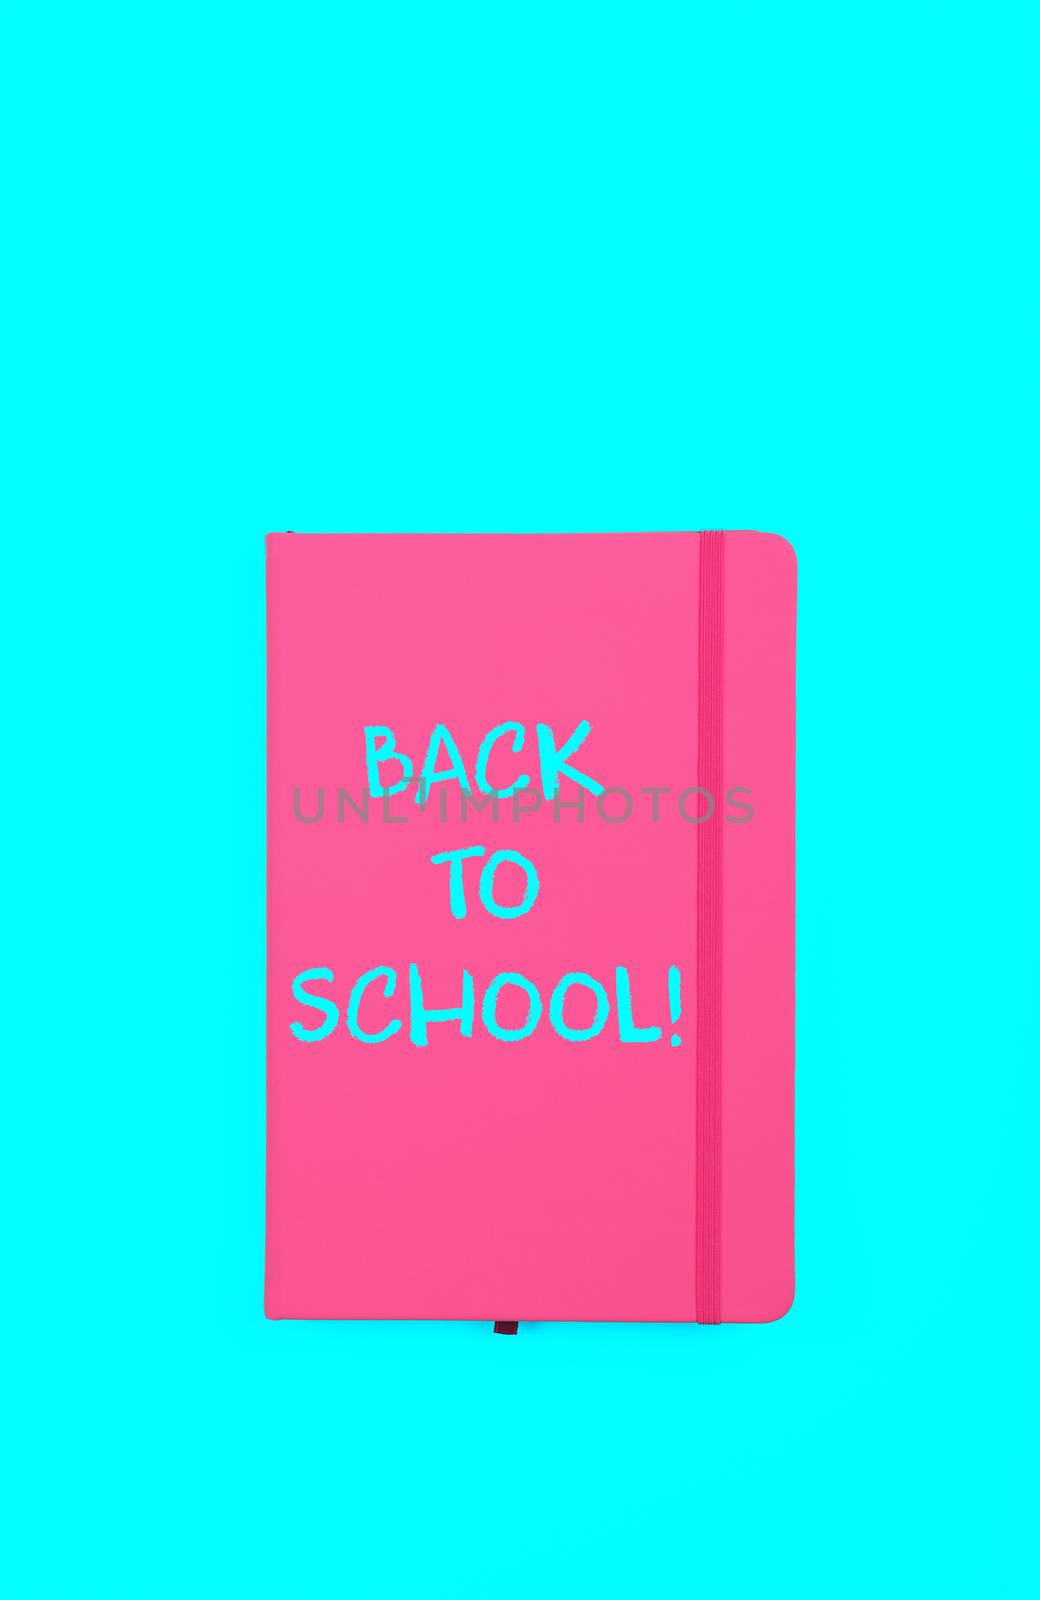 Back to school sign on pink notebook by BreakingTheWalls